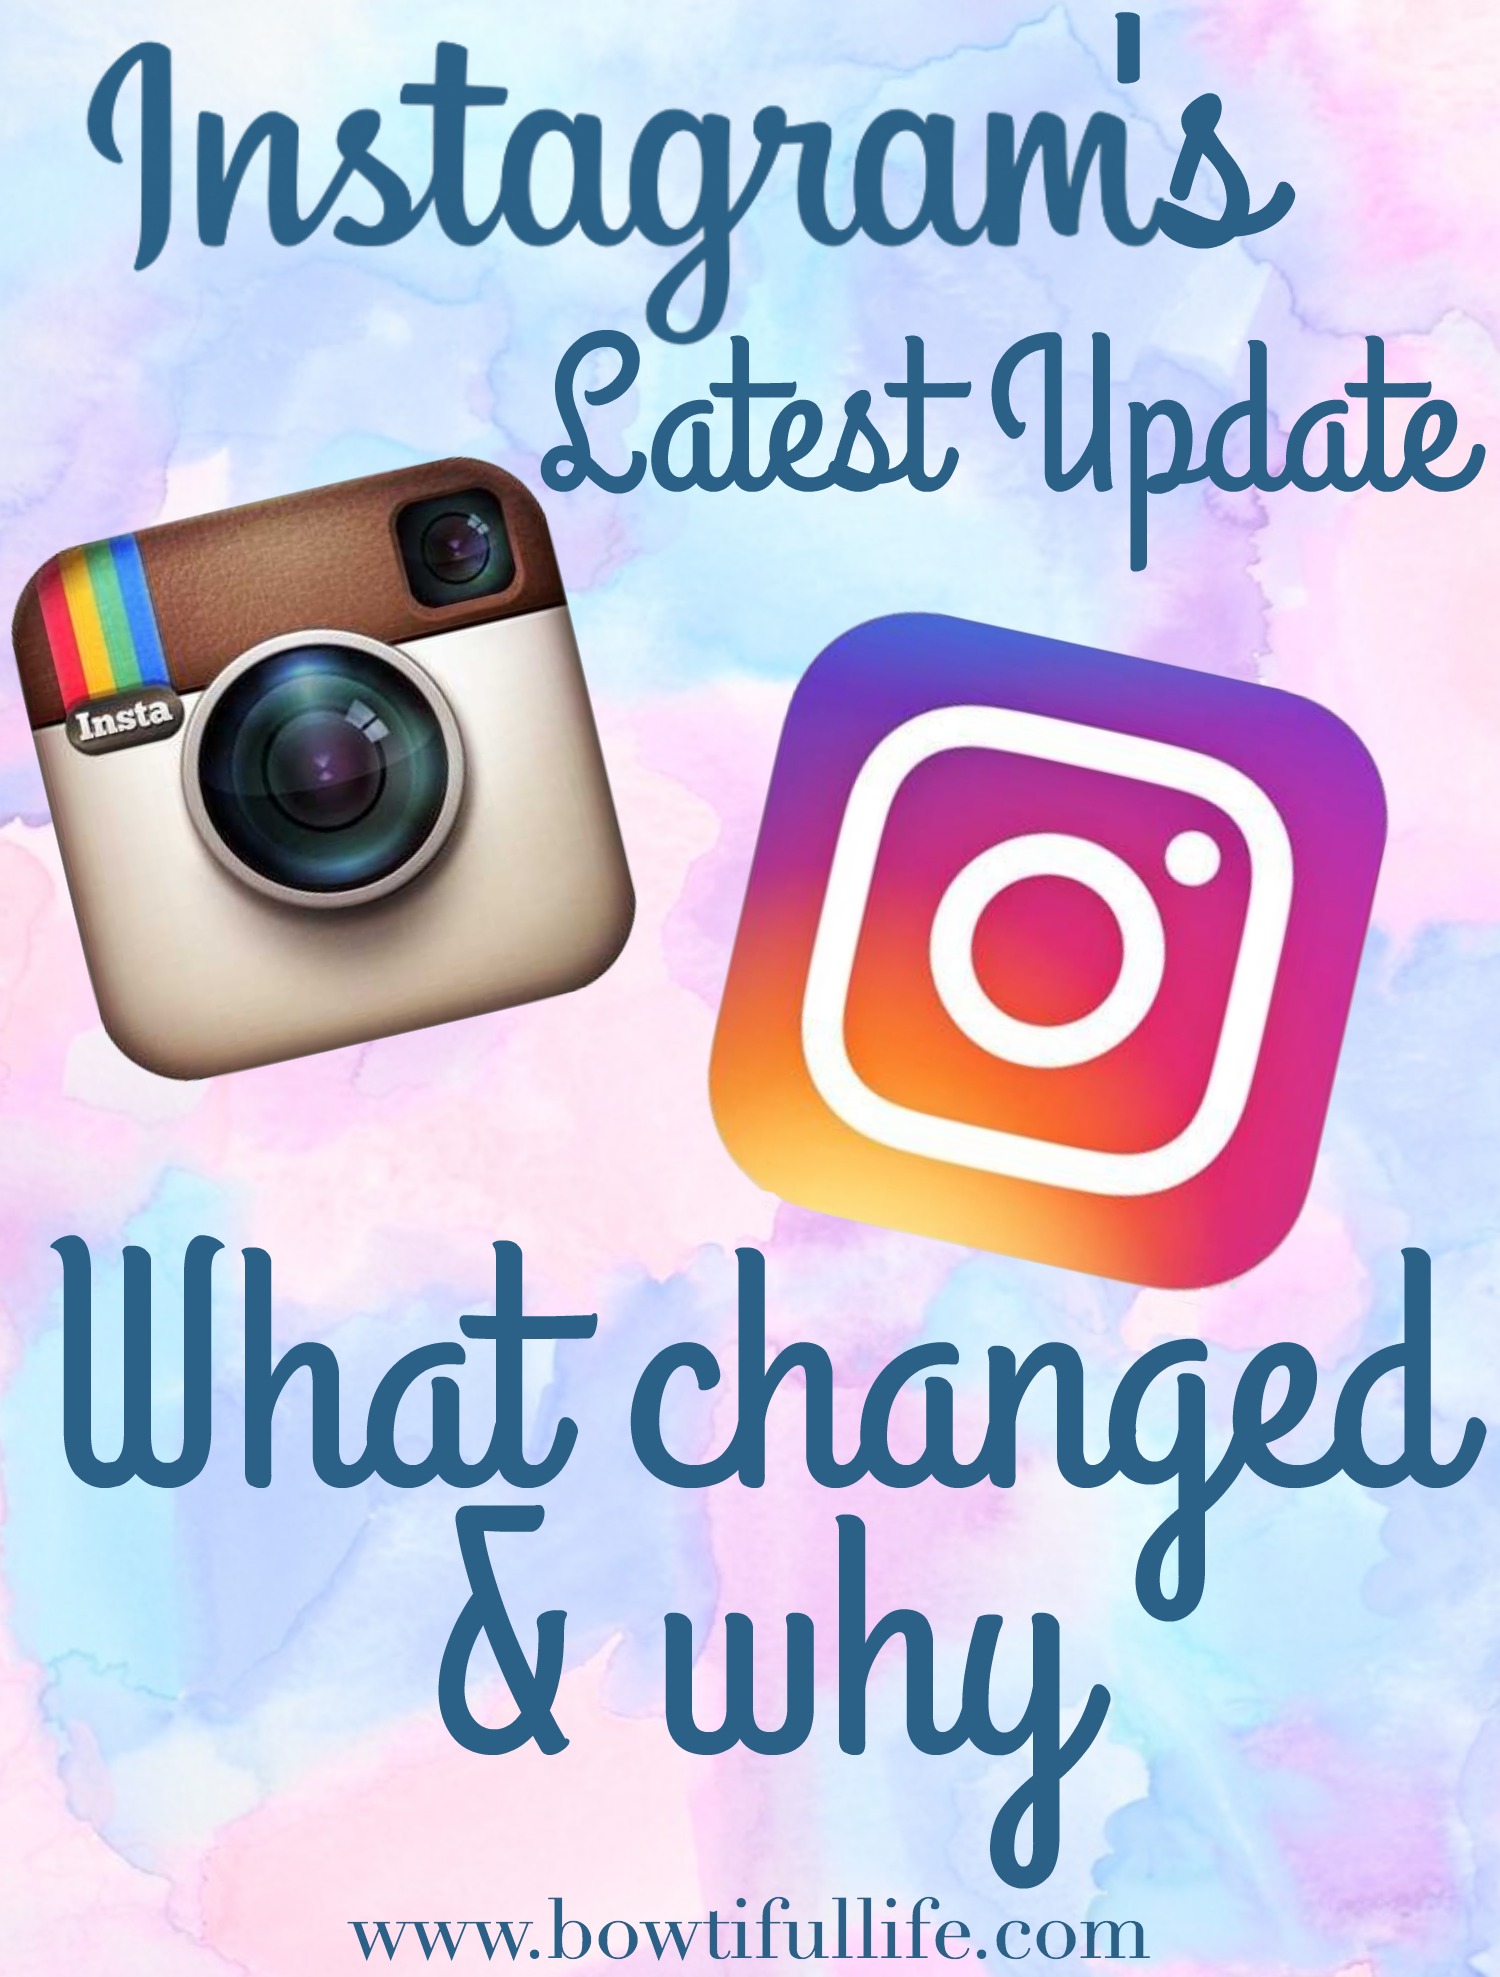 Instagram App and Logo Update May 2016 Bowtiful Life